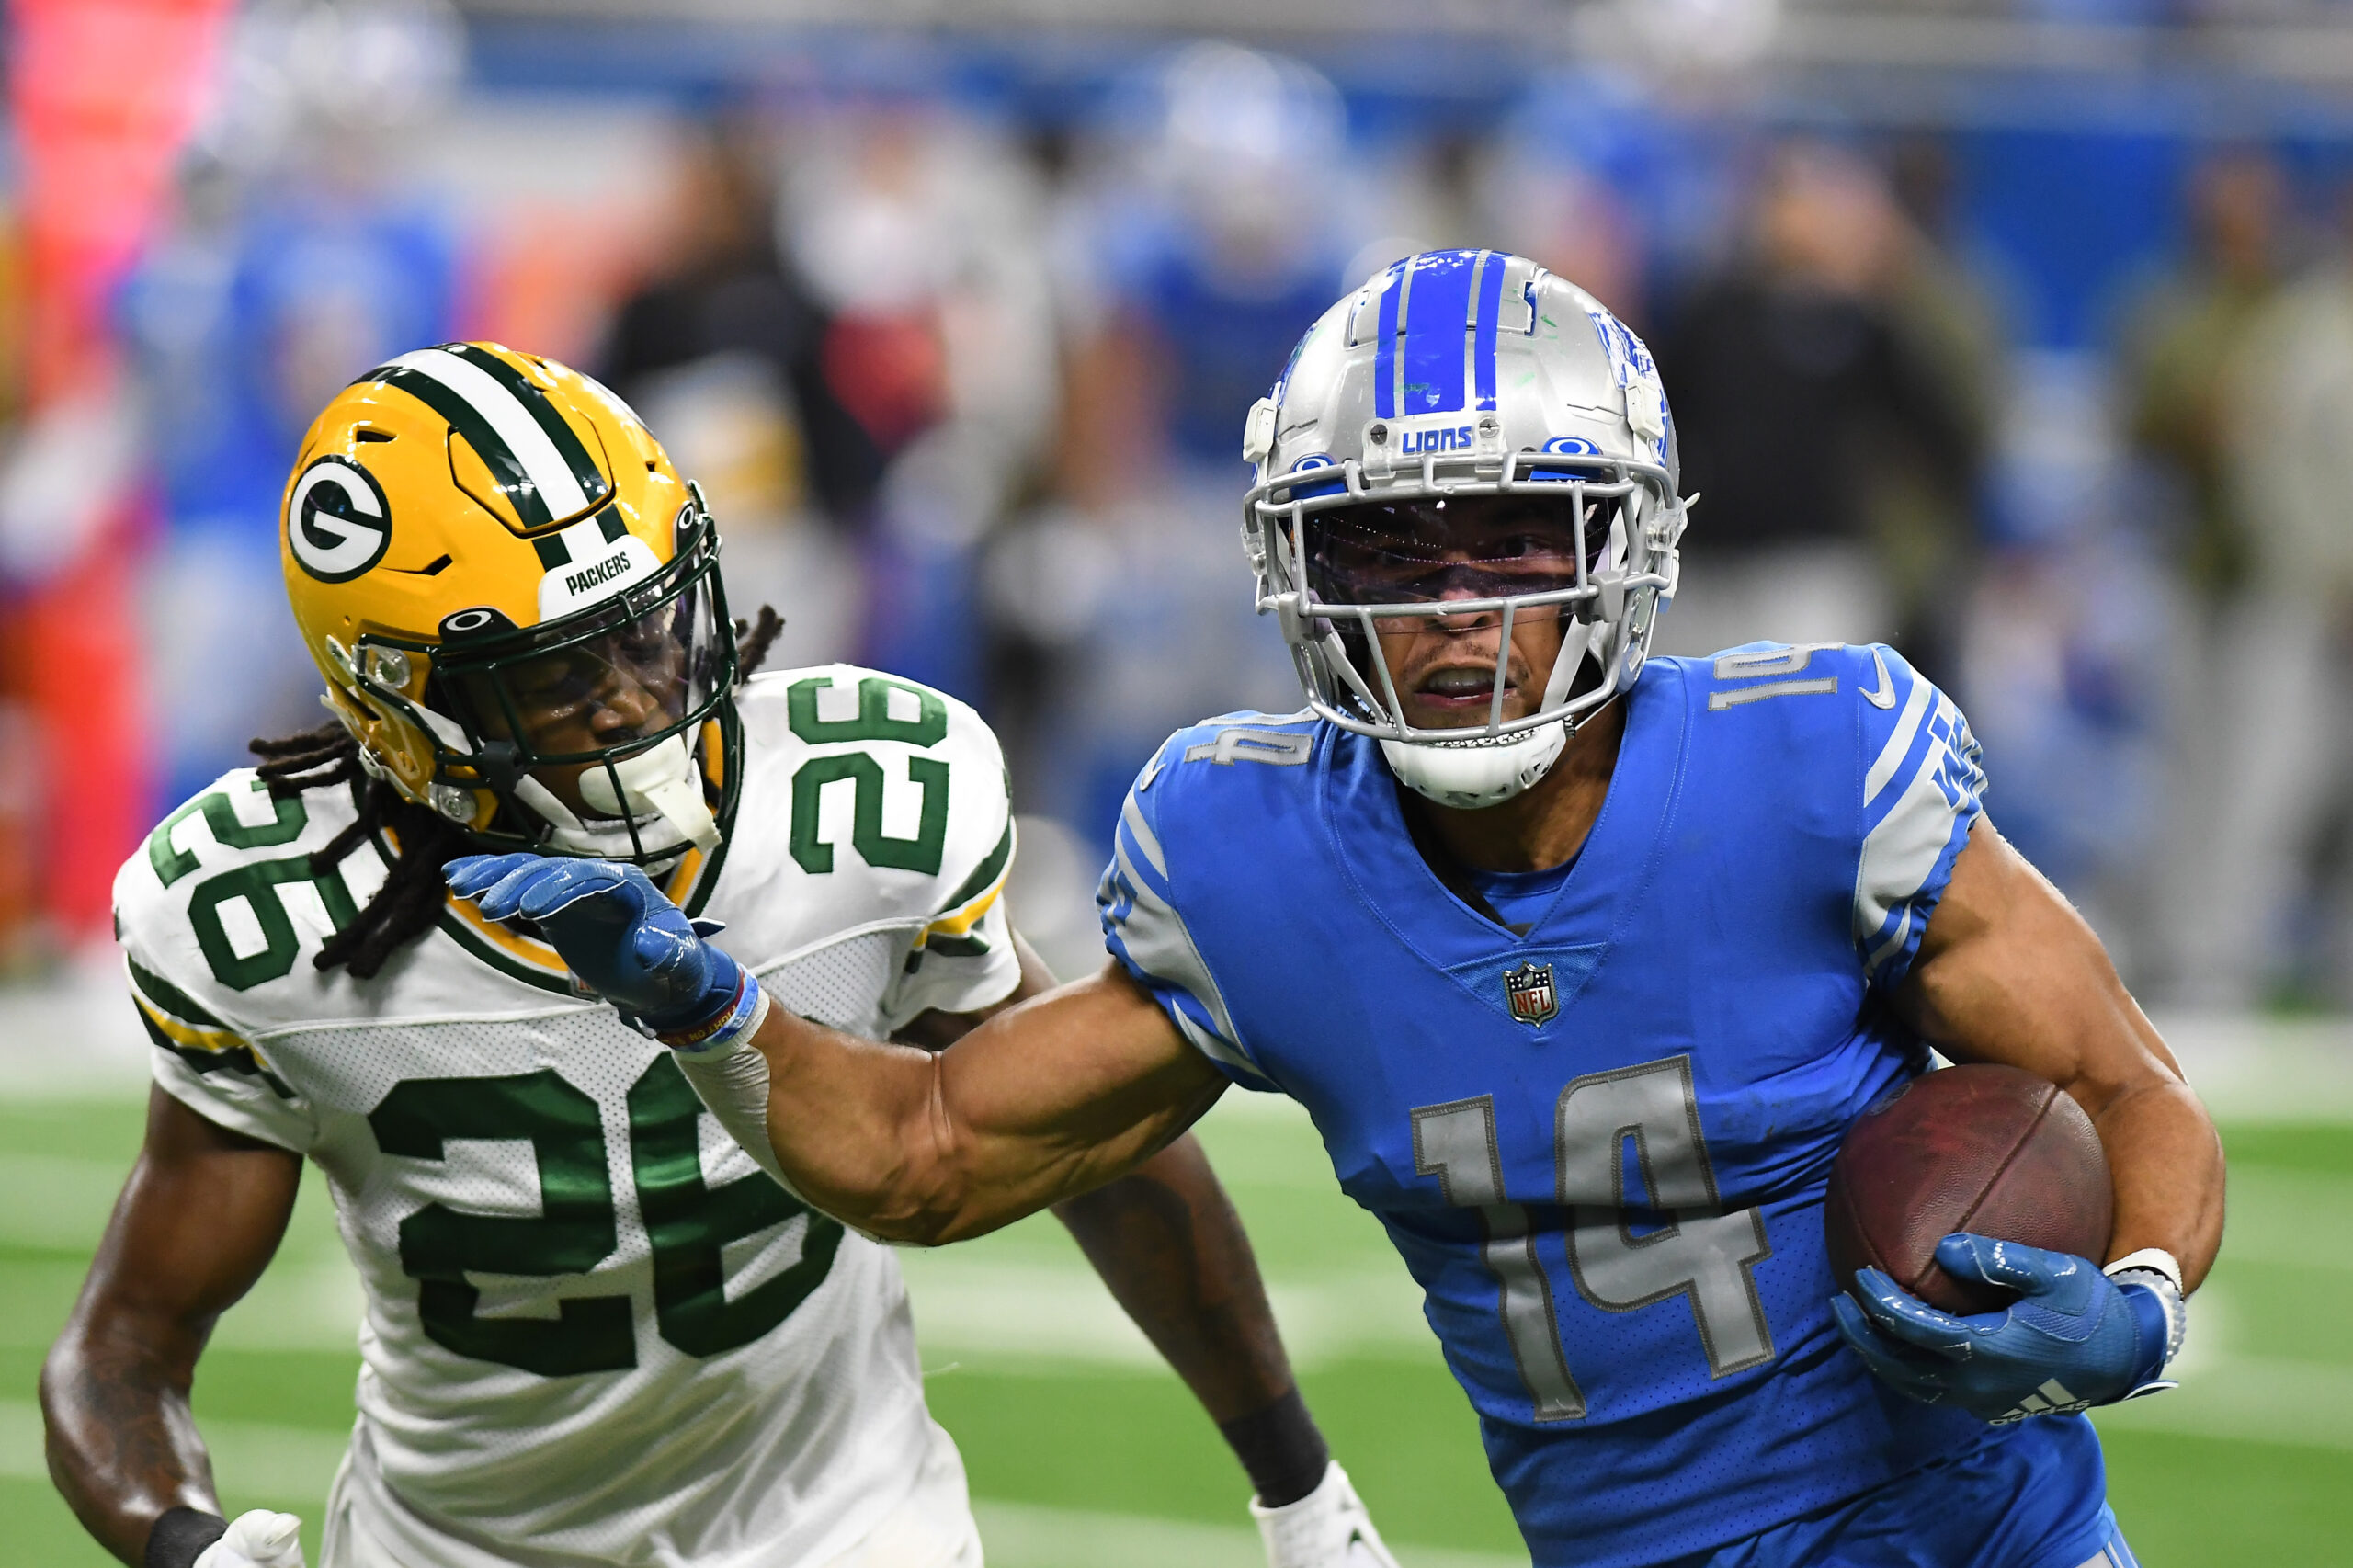 NFL Week Four Picks and Parlays: Lions @ Packers